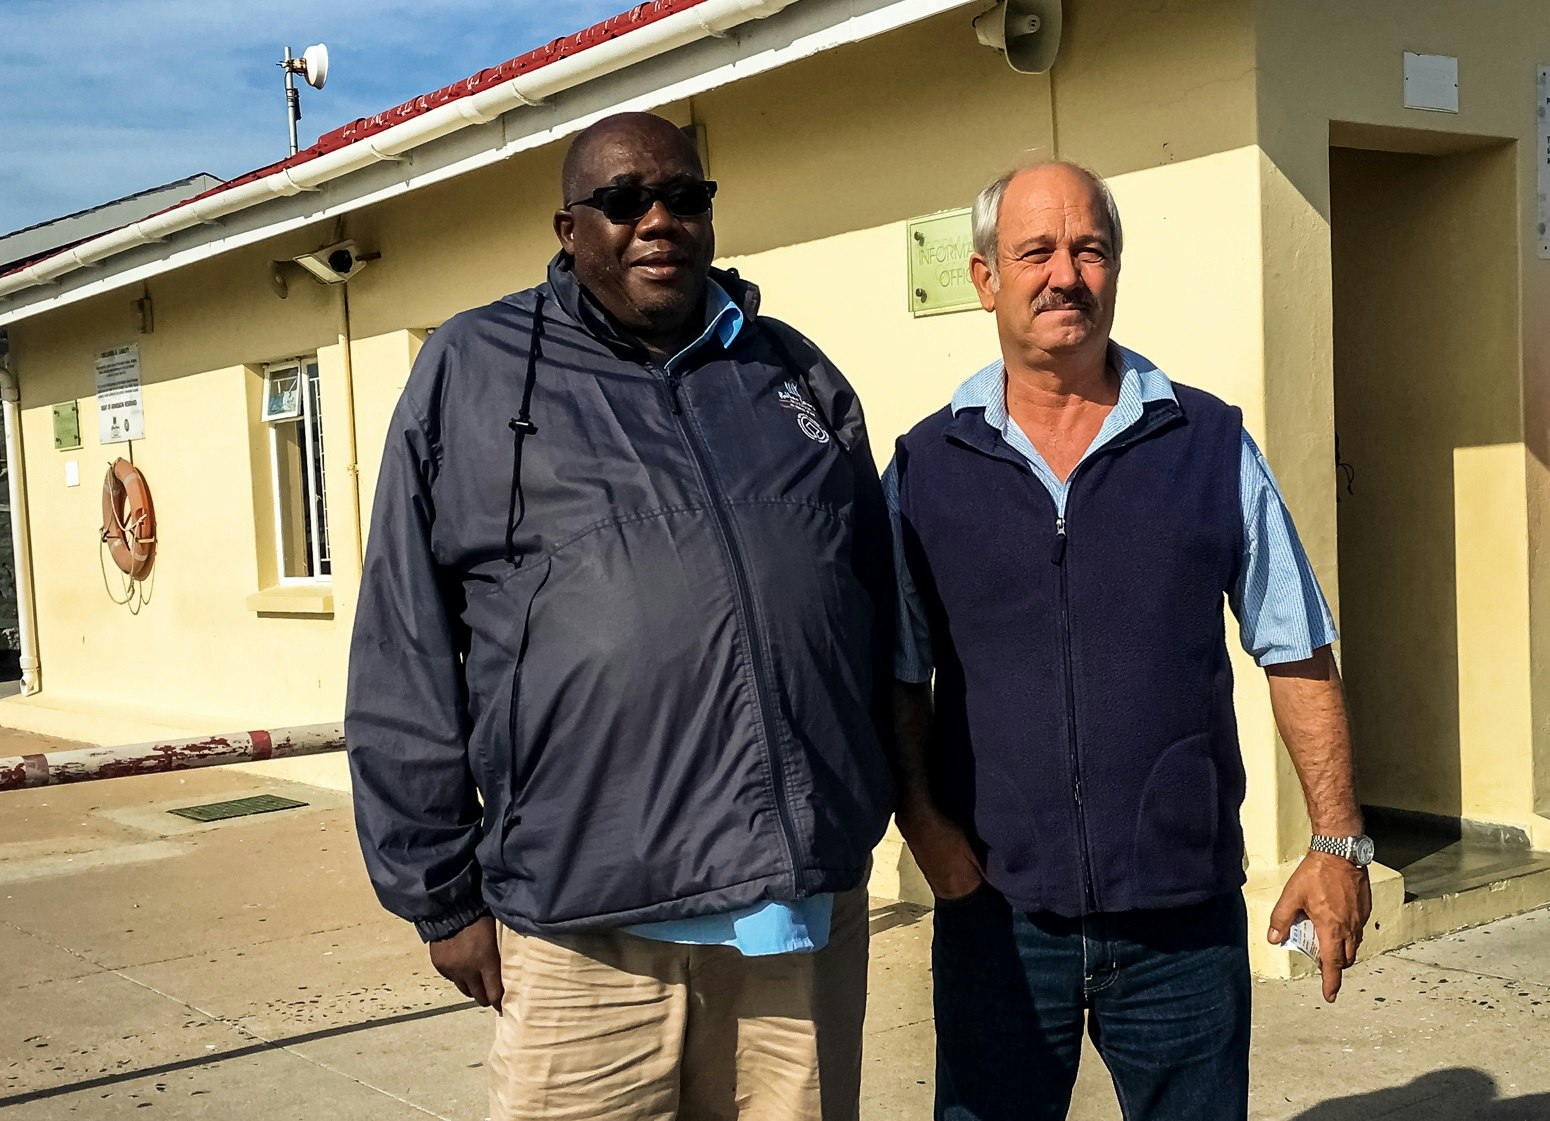 Christo Brand and Thulani Mabaso stand next to each other on the grounds of Robben Island prison.